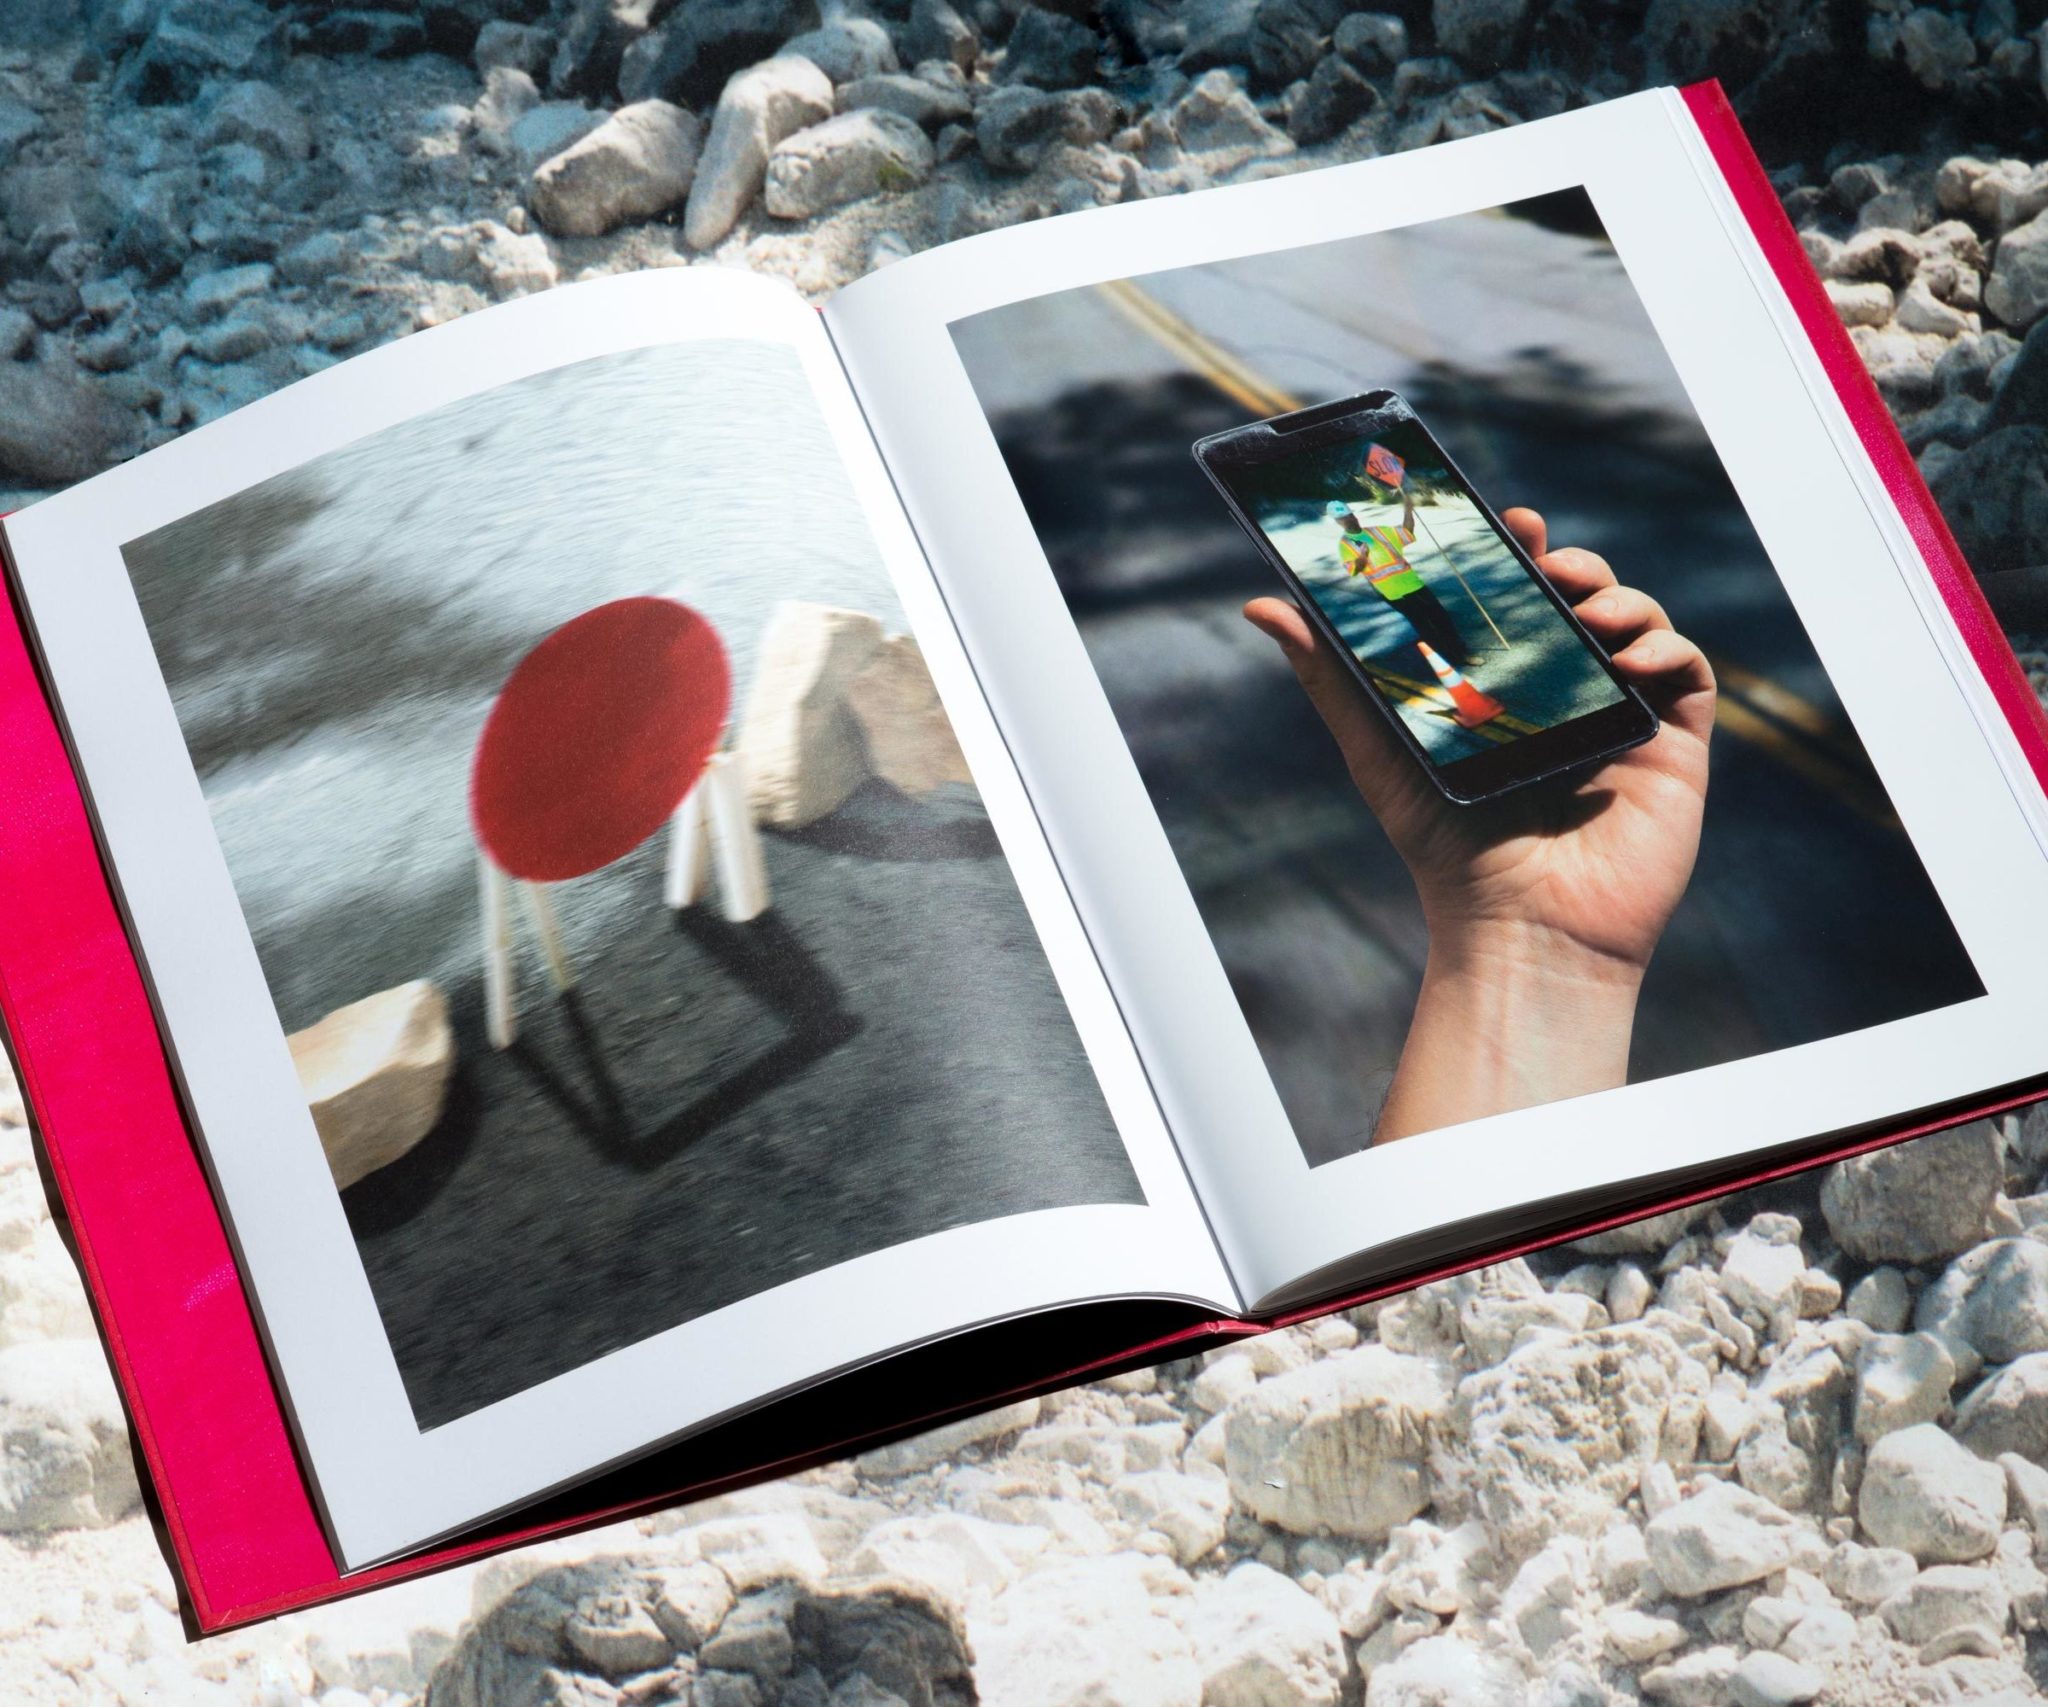 This Book Might Be The End of Photography As We Know It